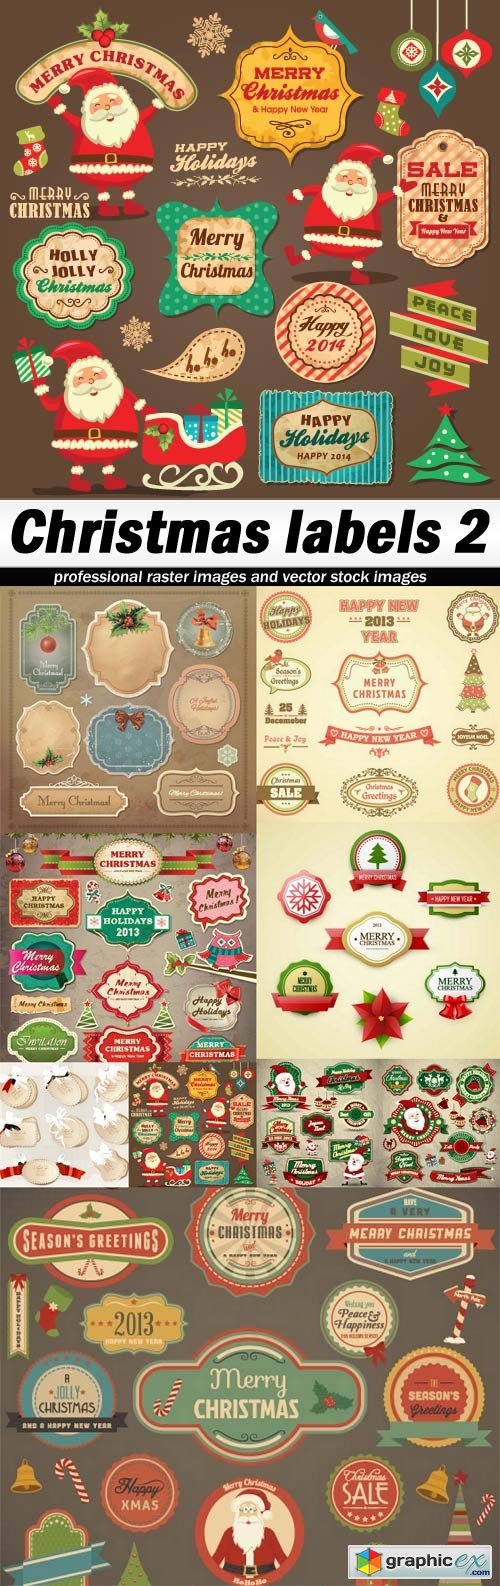 Christmas labels 2